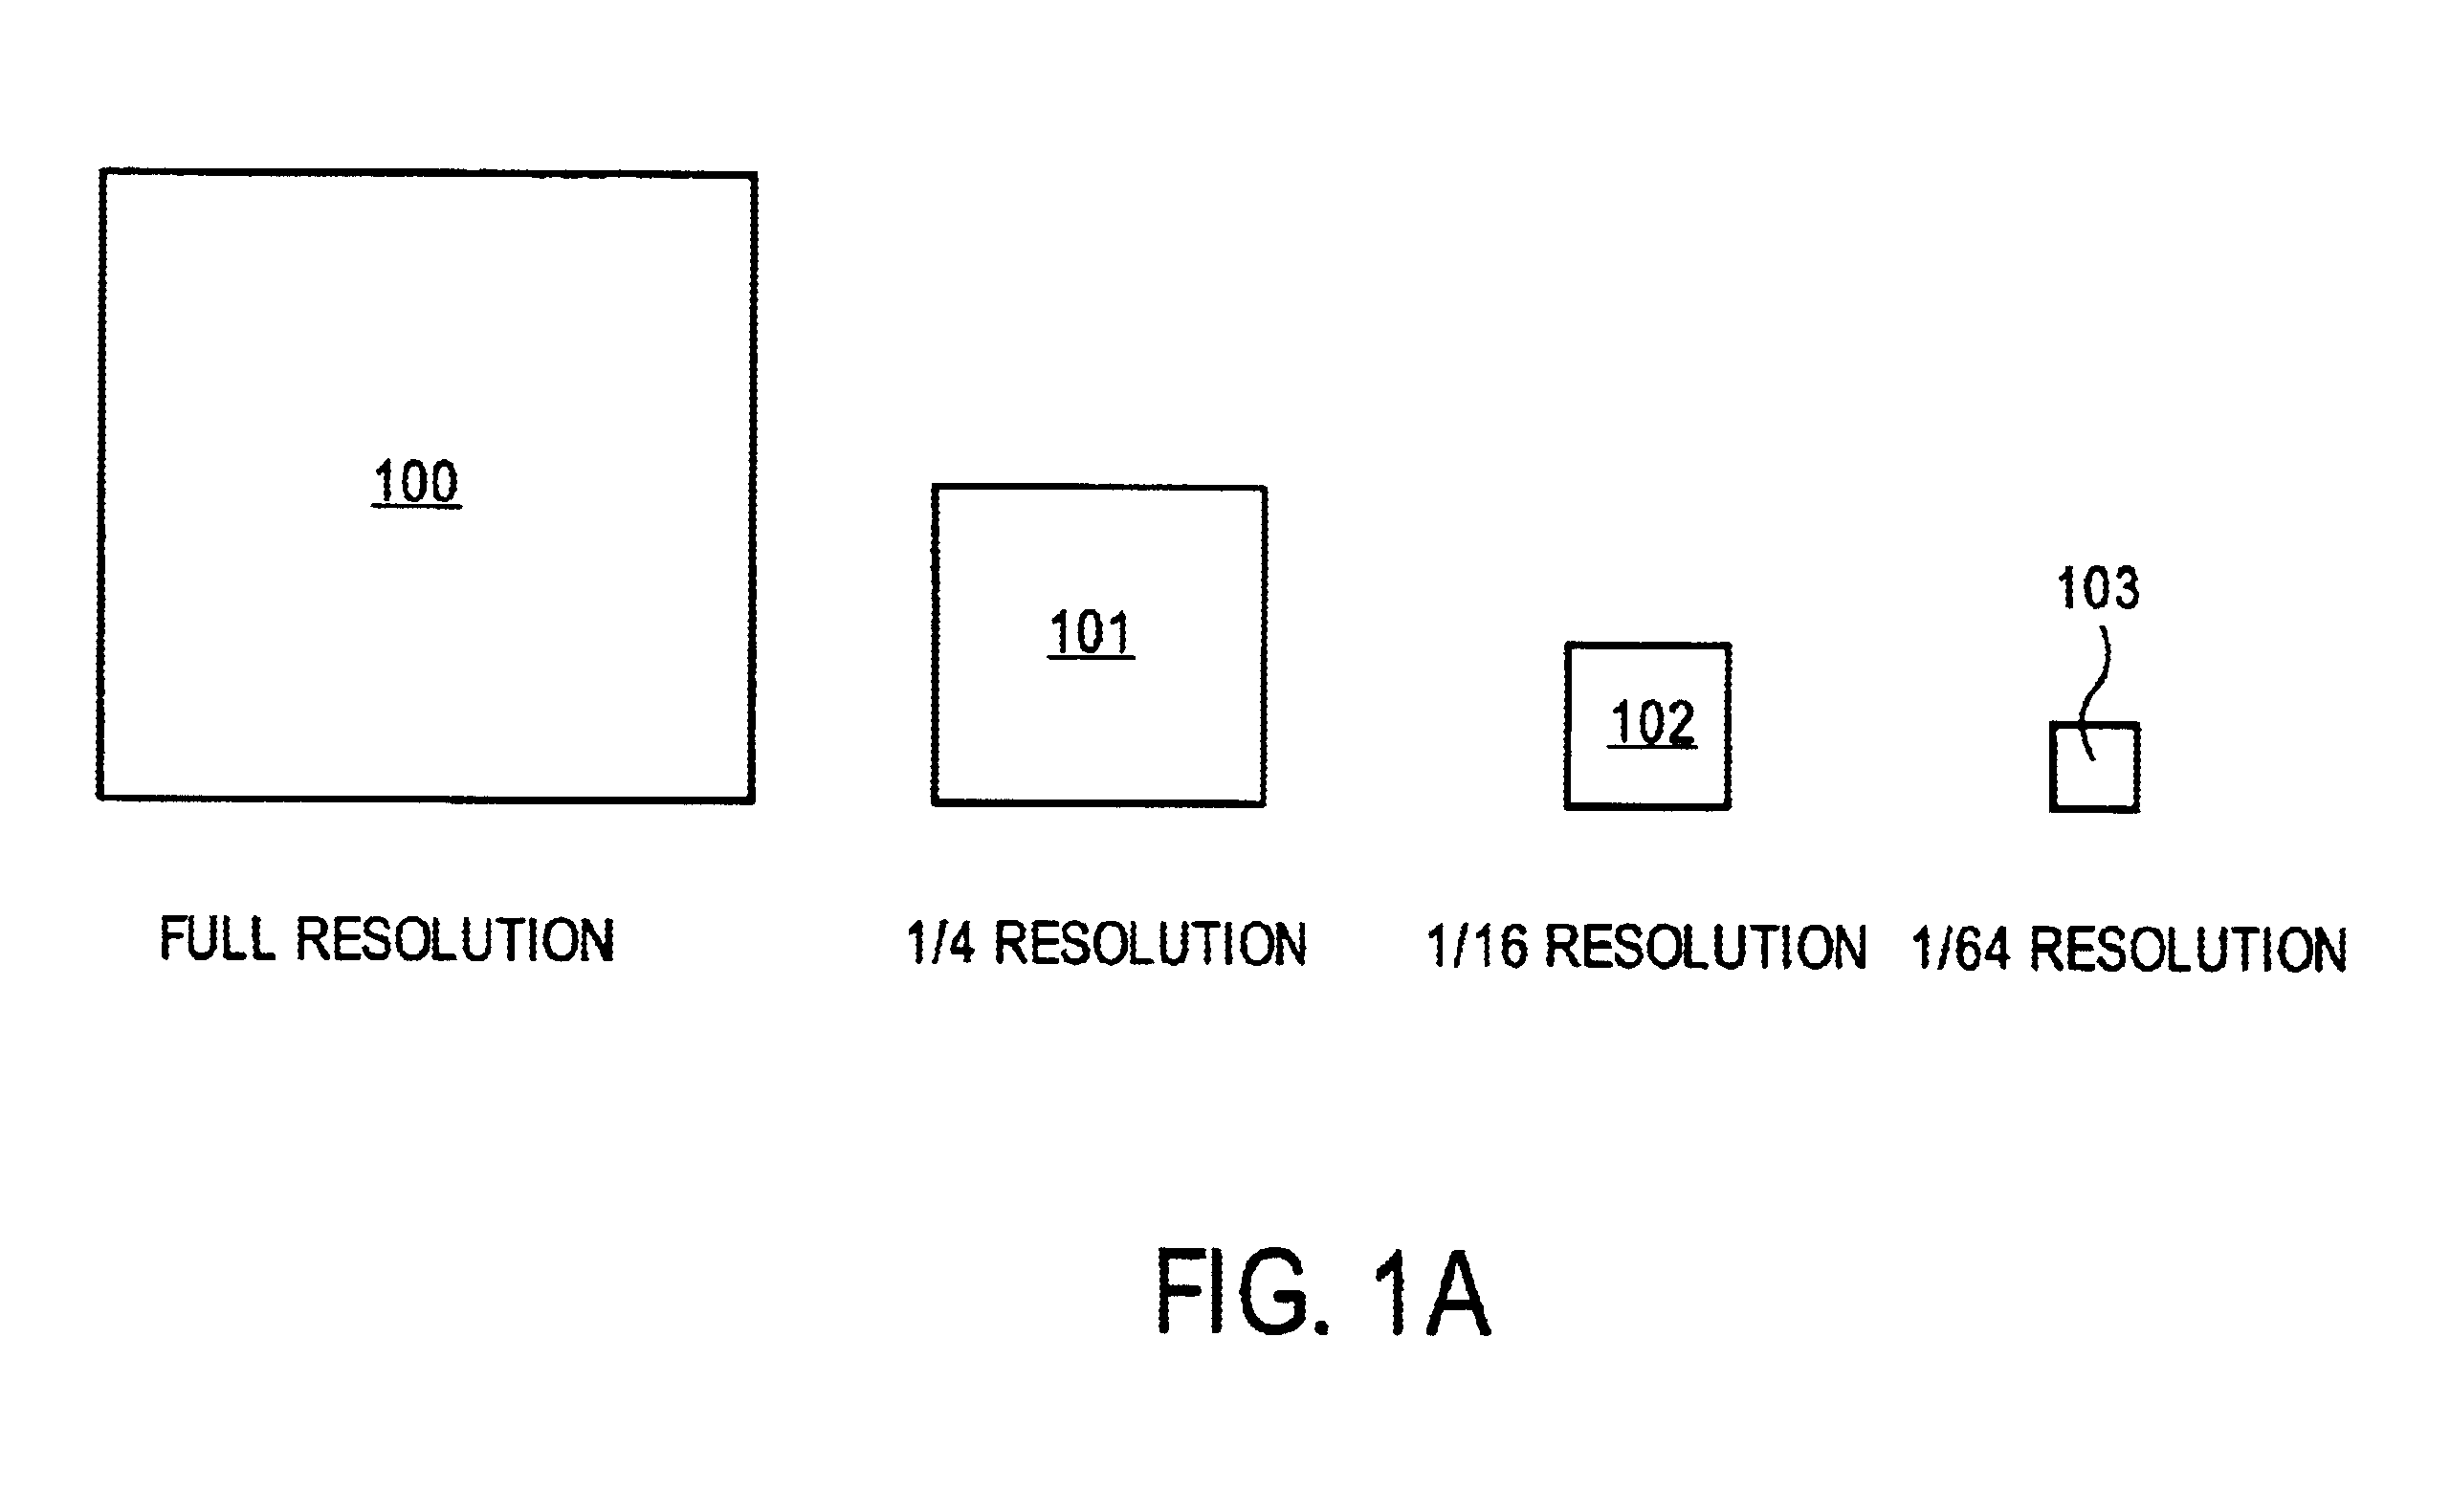 System and method for tiled multiresolution encoding/decoding and communication with lossless selective regions of interest via data reuse